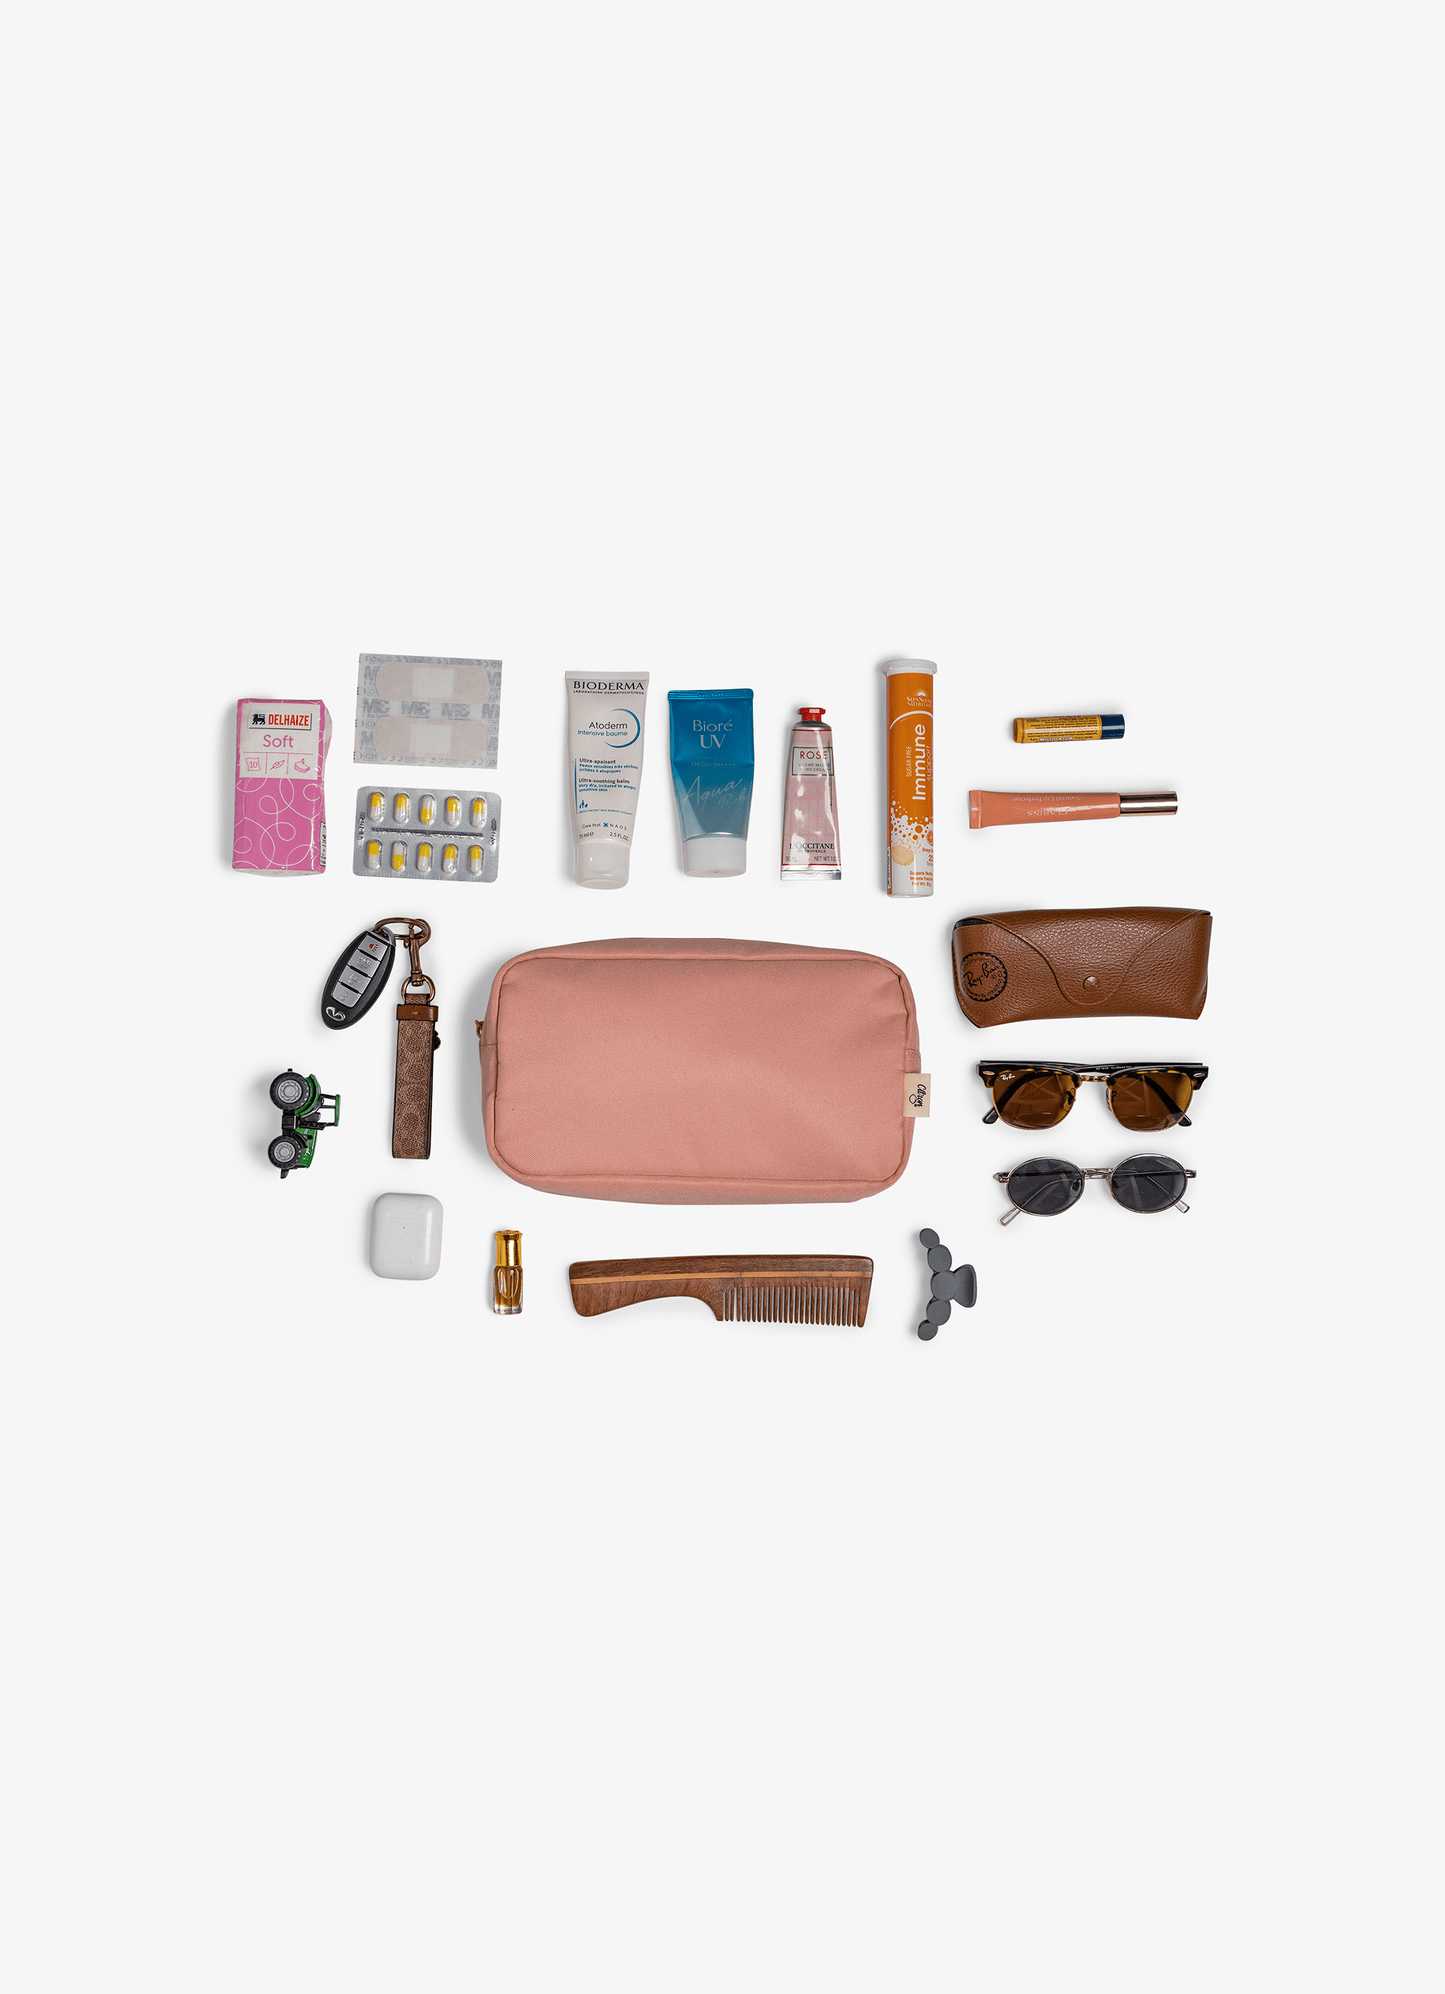 Classic Travel Pouch - Blush Pink